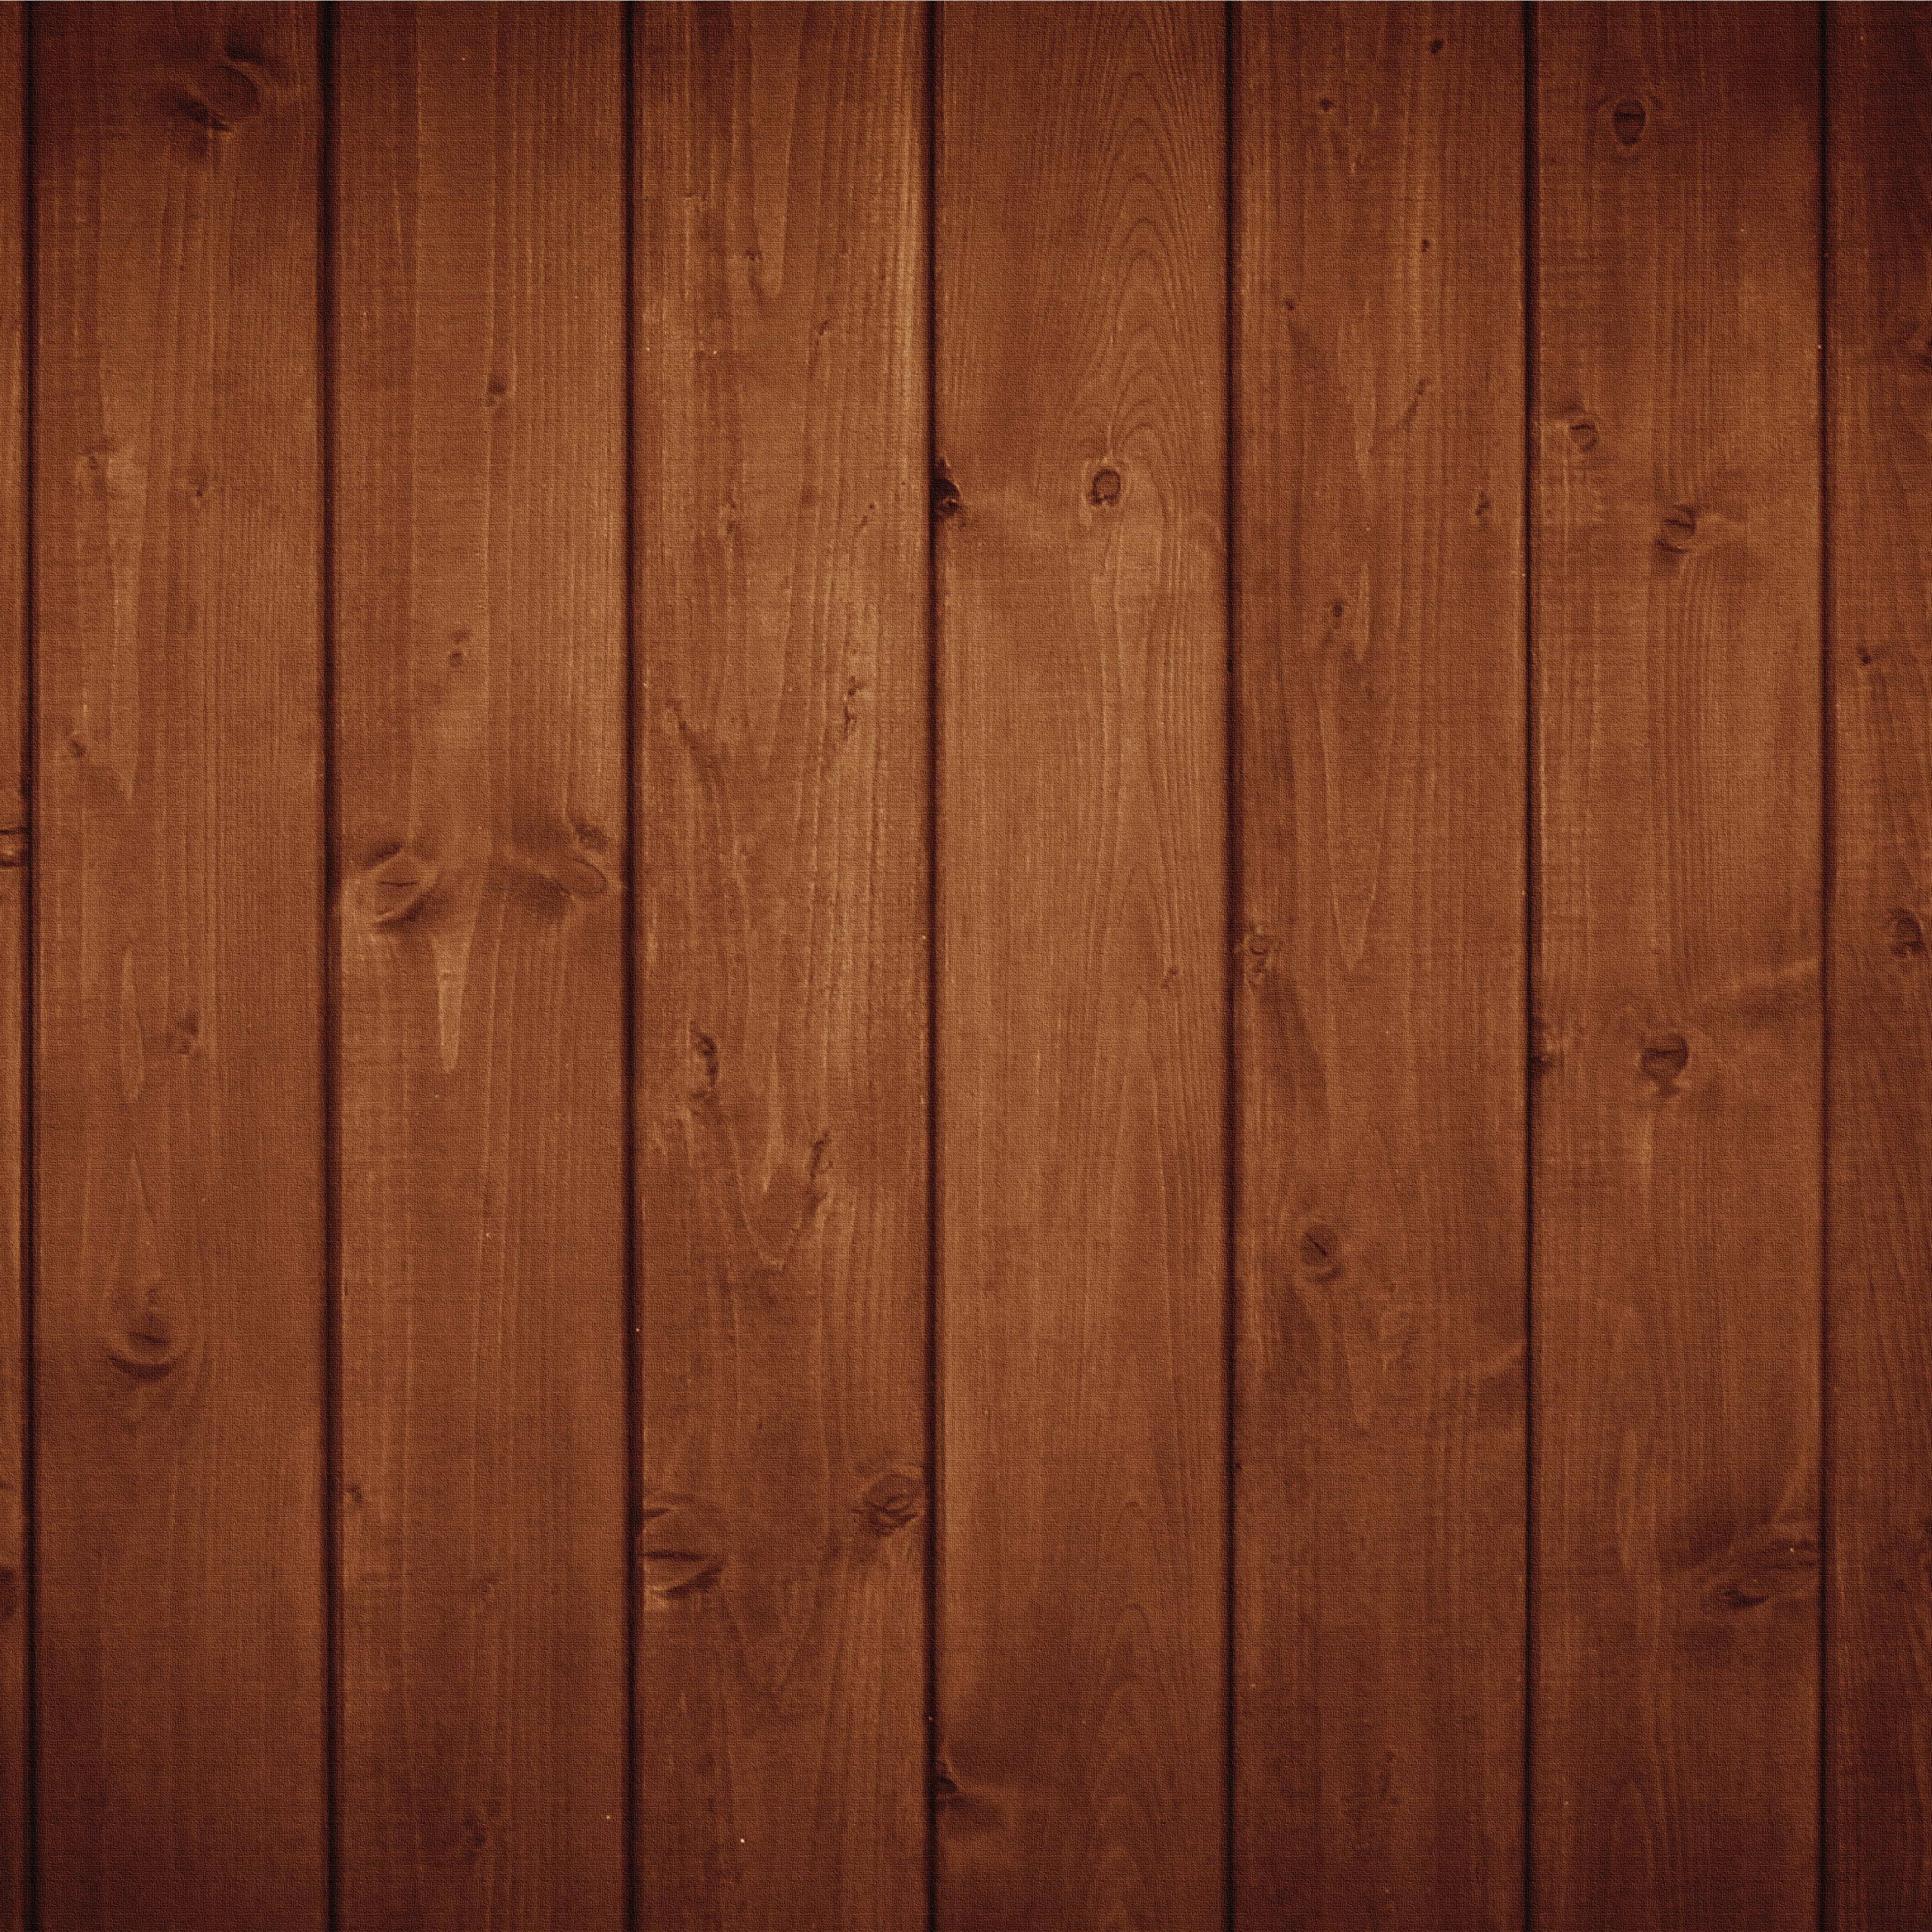 wood background wallpaper, download photo, background, texture, tree wood, download photo, planking